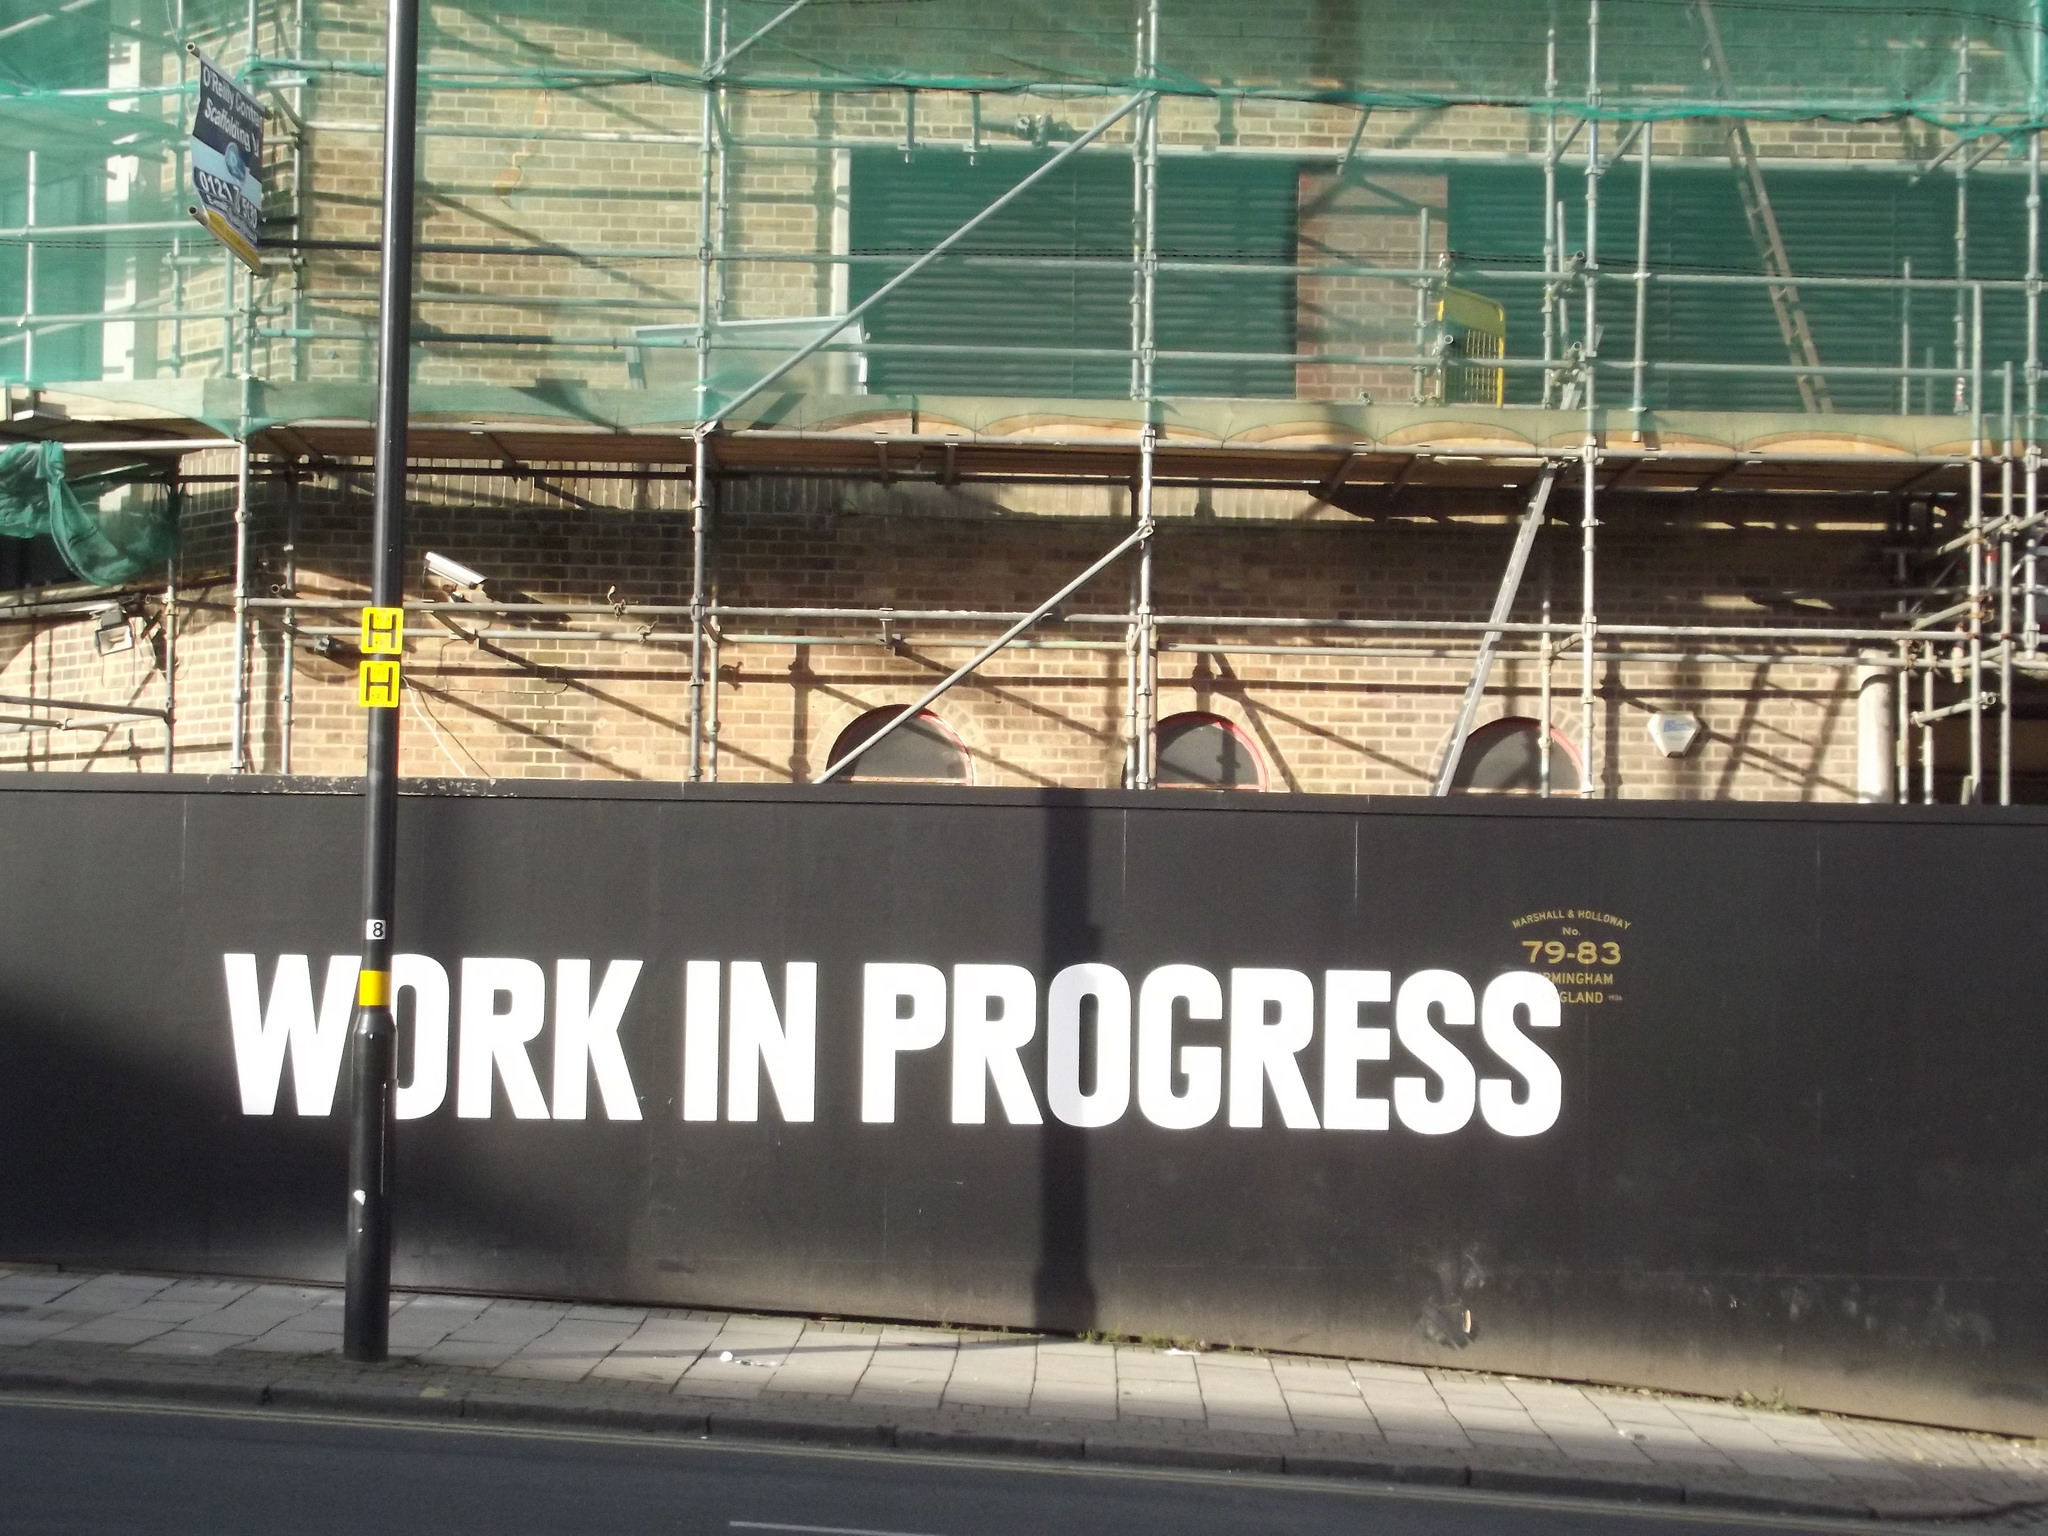 The words "Work in Progress" over a building being refinished, published as part of: "The Complete Guide to Content Marketing for Small Business, Part 3: Improving Over Time"